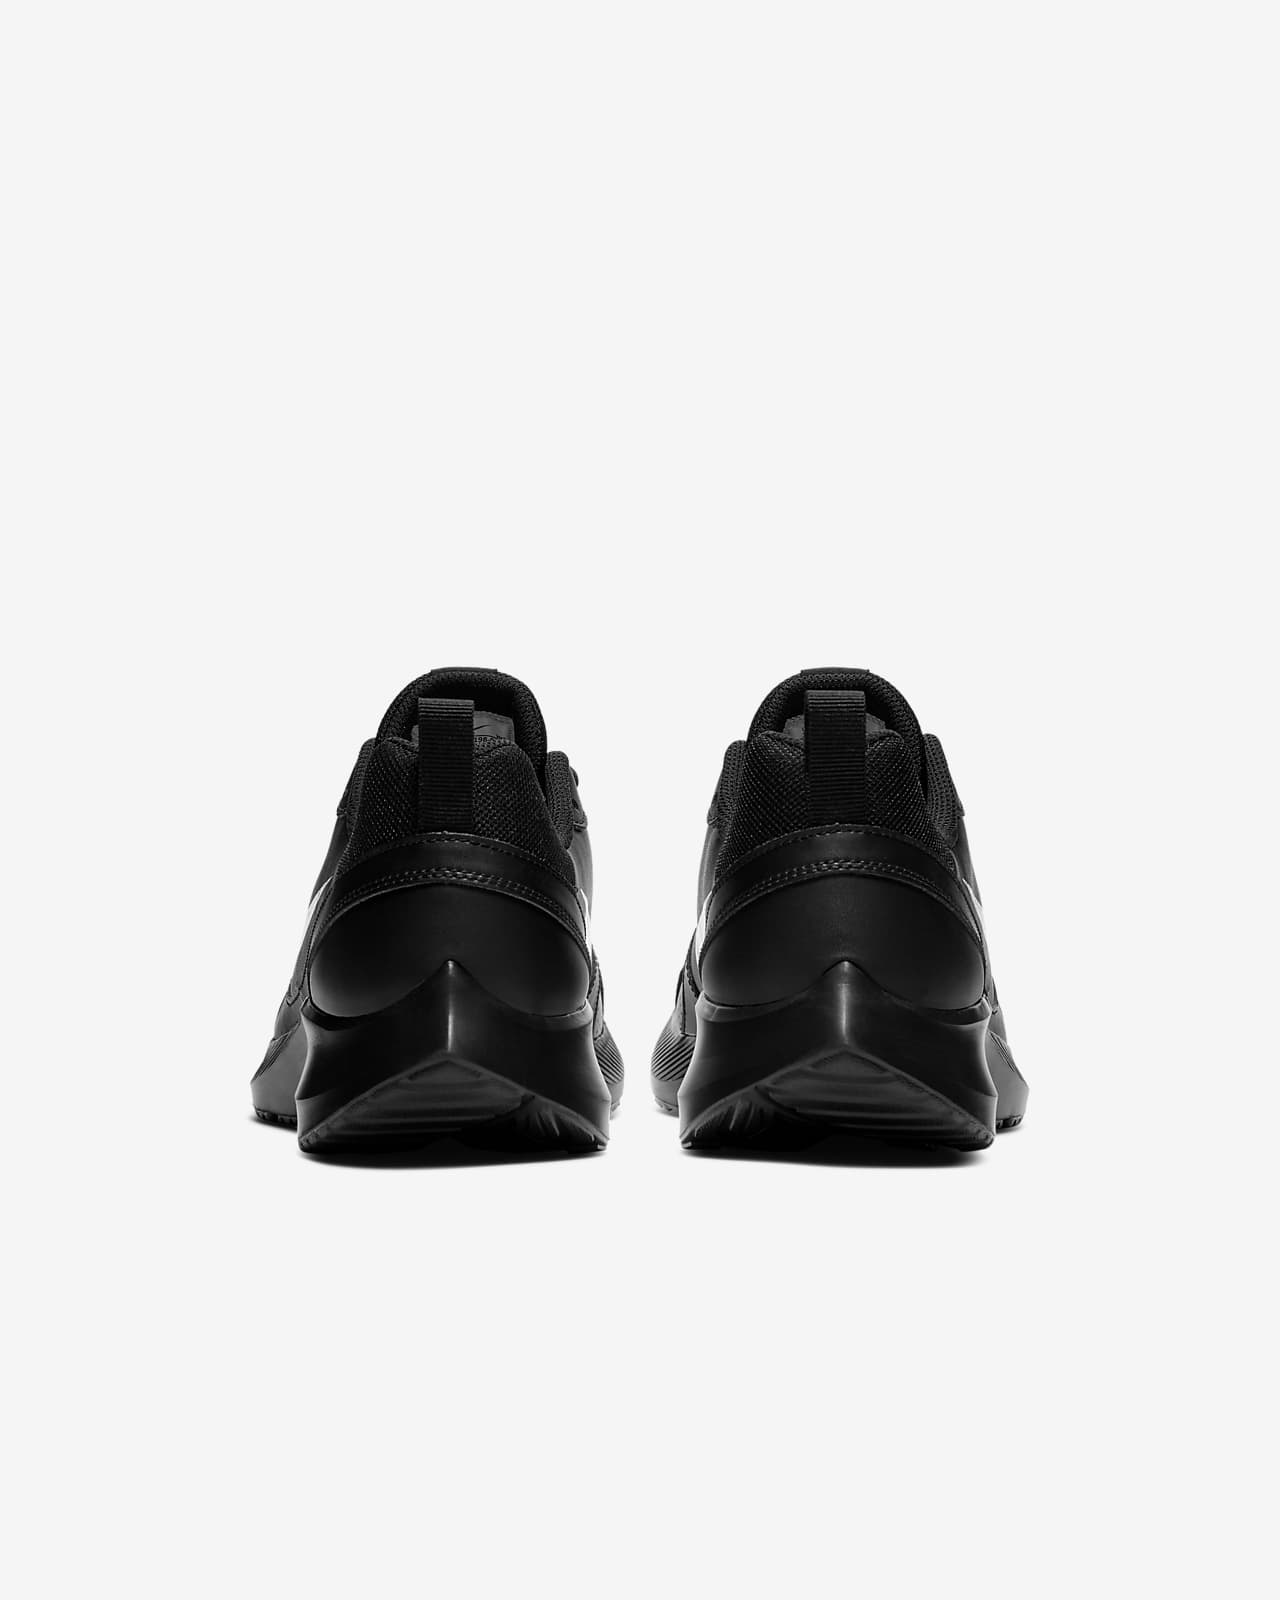 nike black leather running shoes